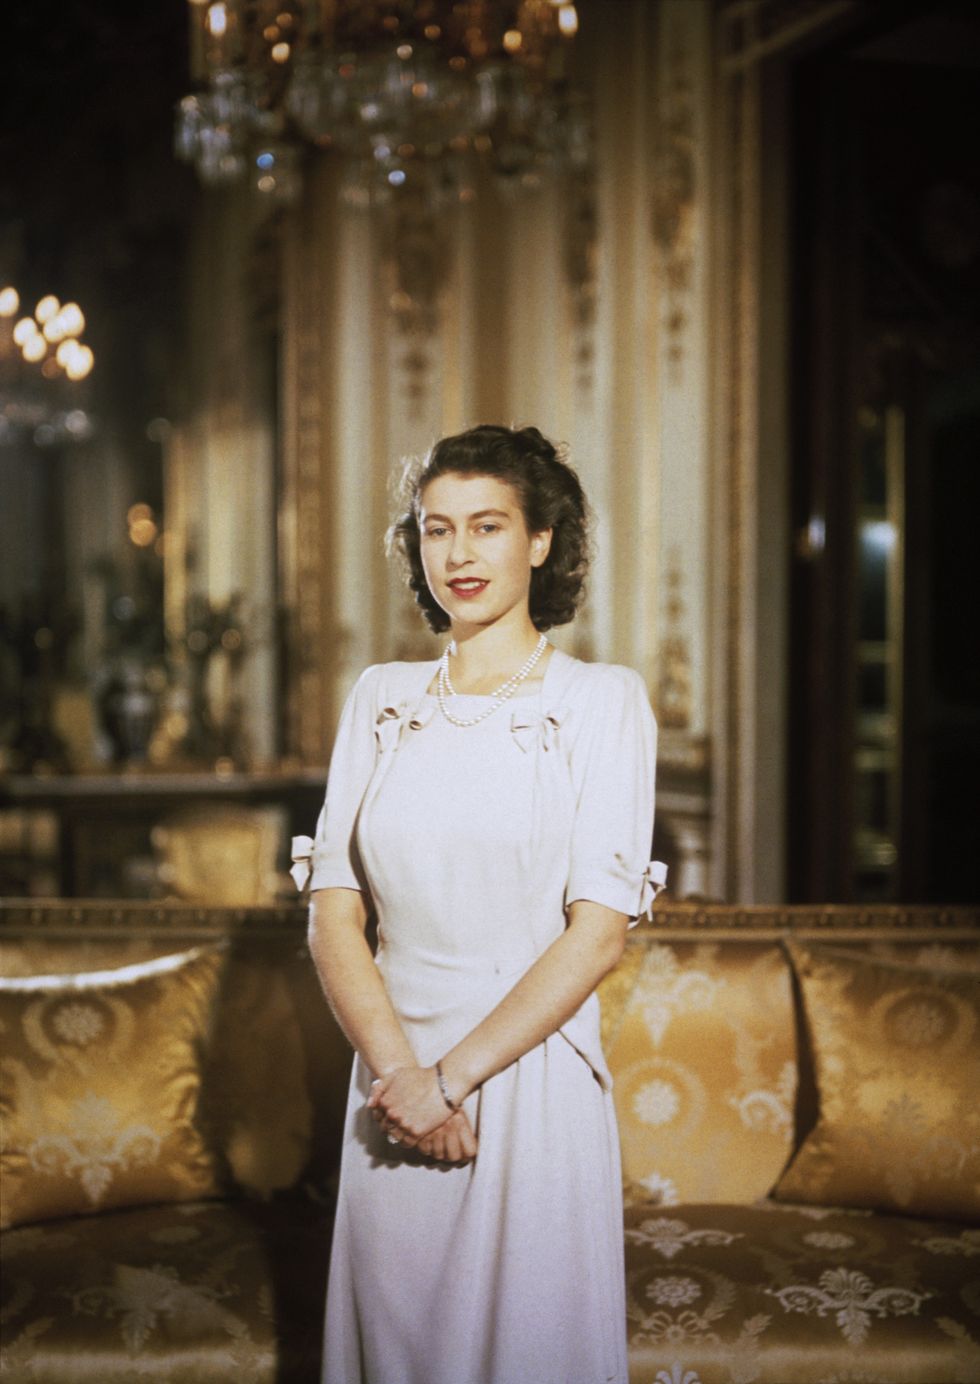 princess elizabeth, the future queen elizabeth ii, in the state apartments at buckingham palace during her engagement to prince philip, duke of edinburgh, july 1947 photo by hulton archivegetty images